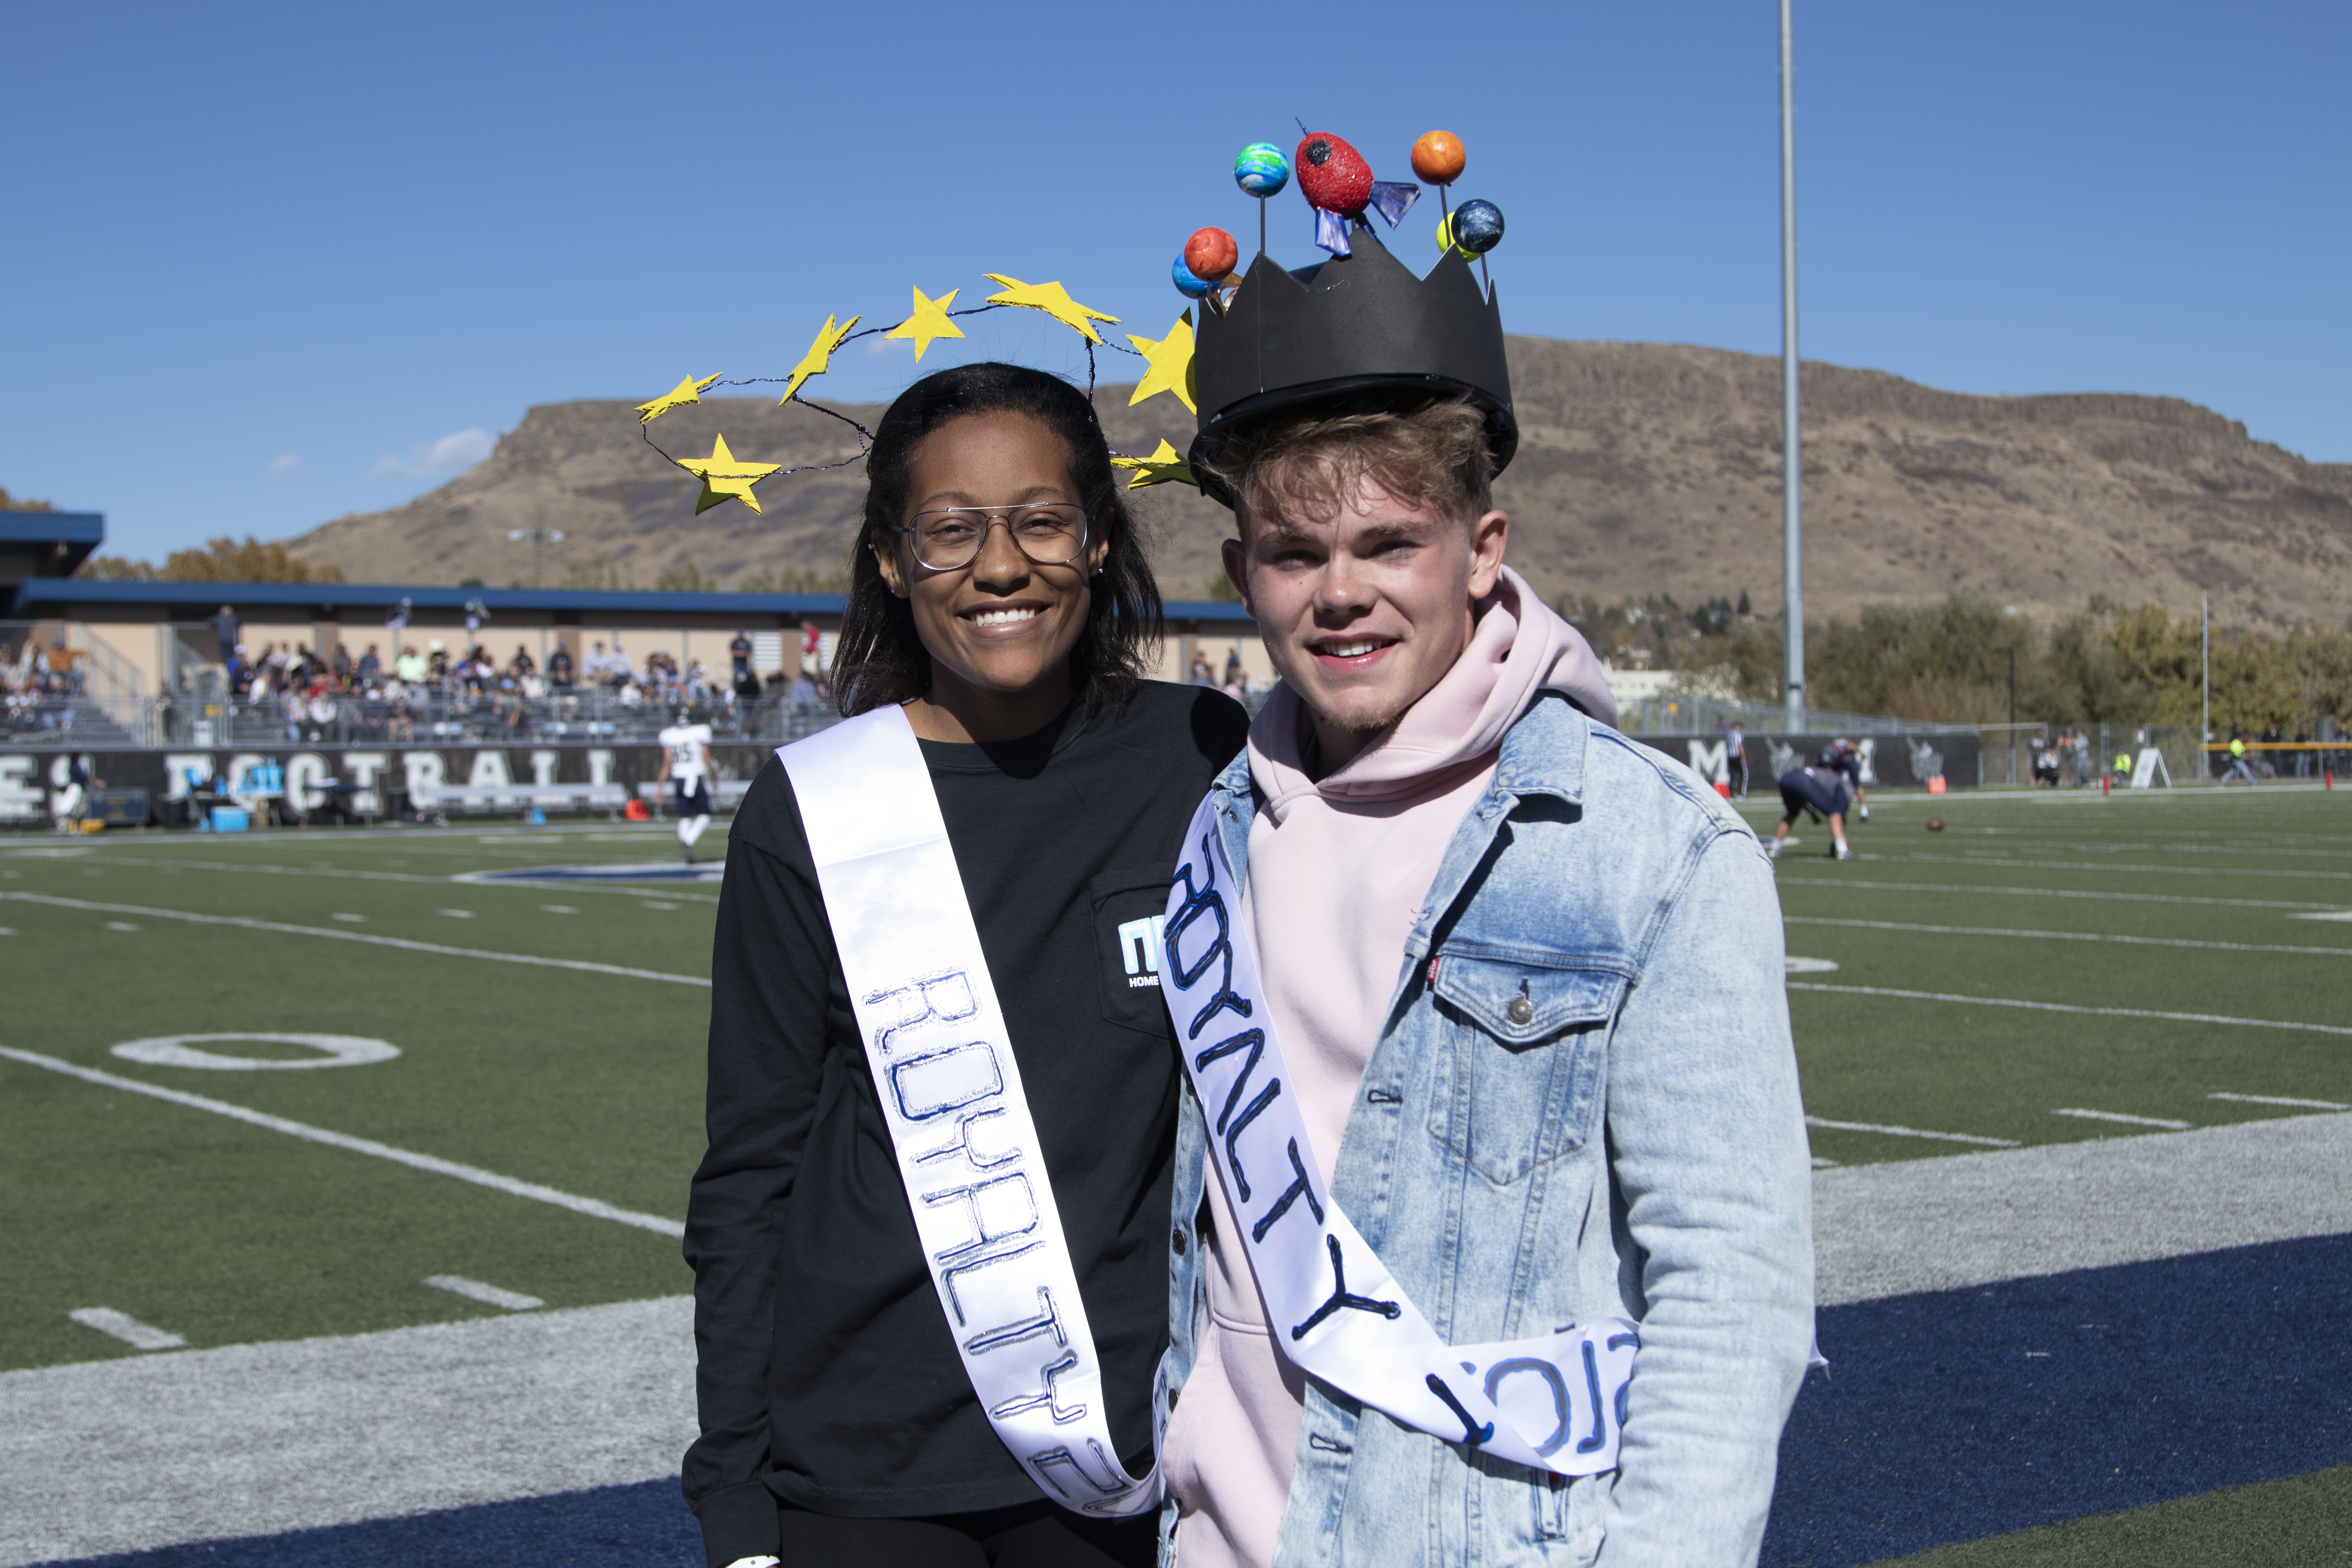 homecoming queen and king at Marv Kay stadium